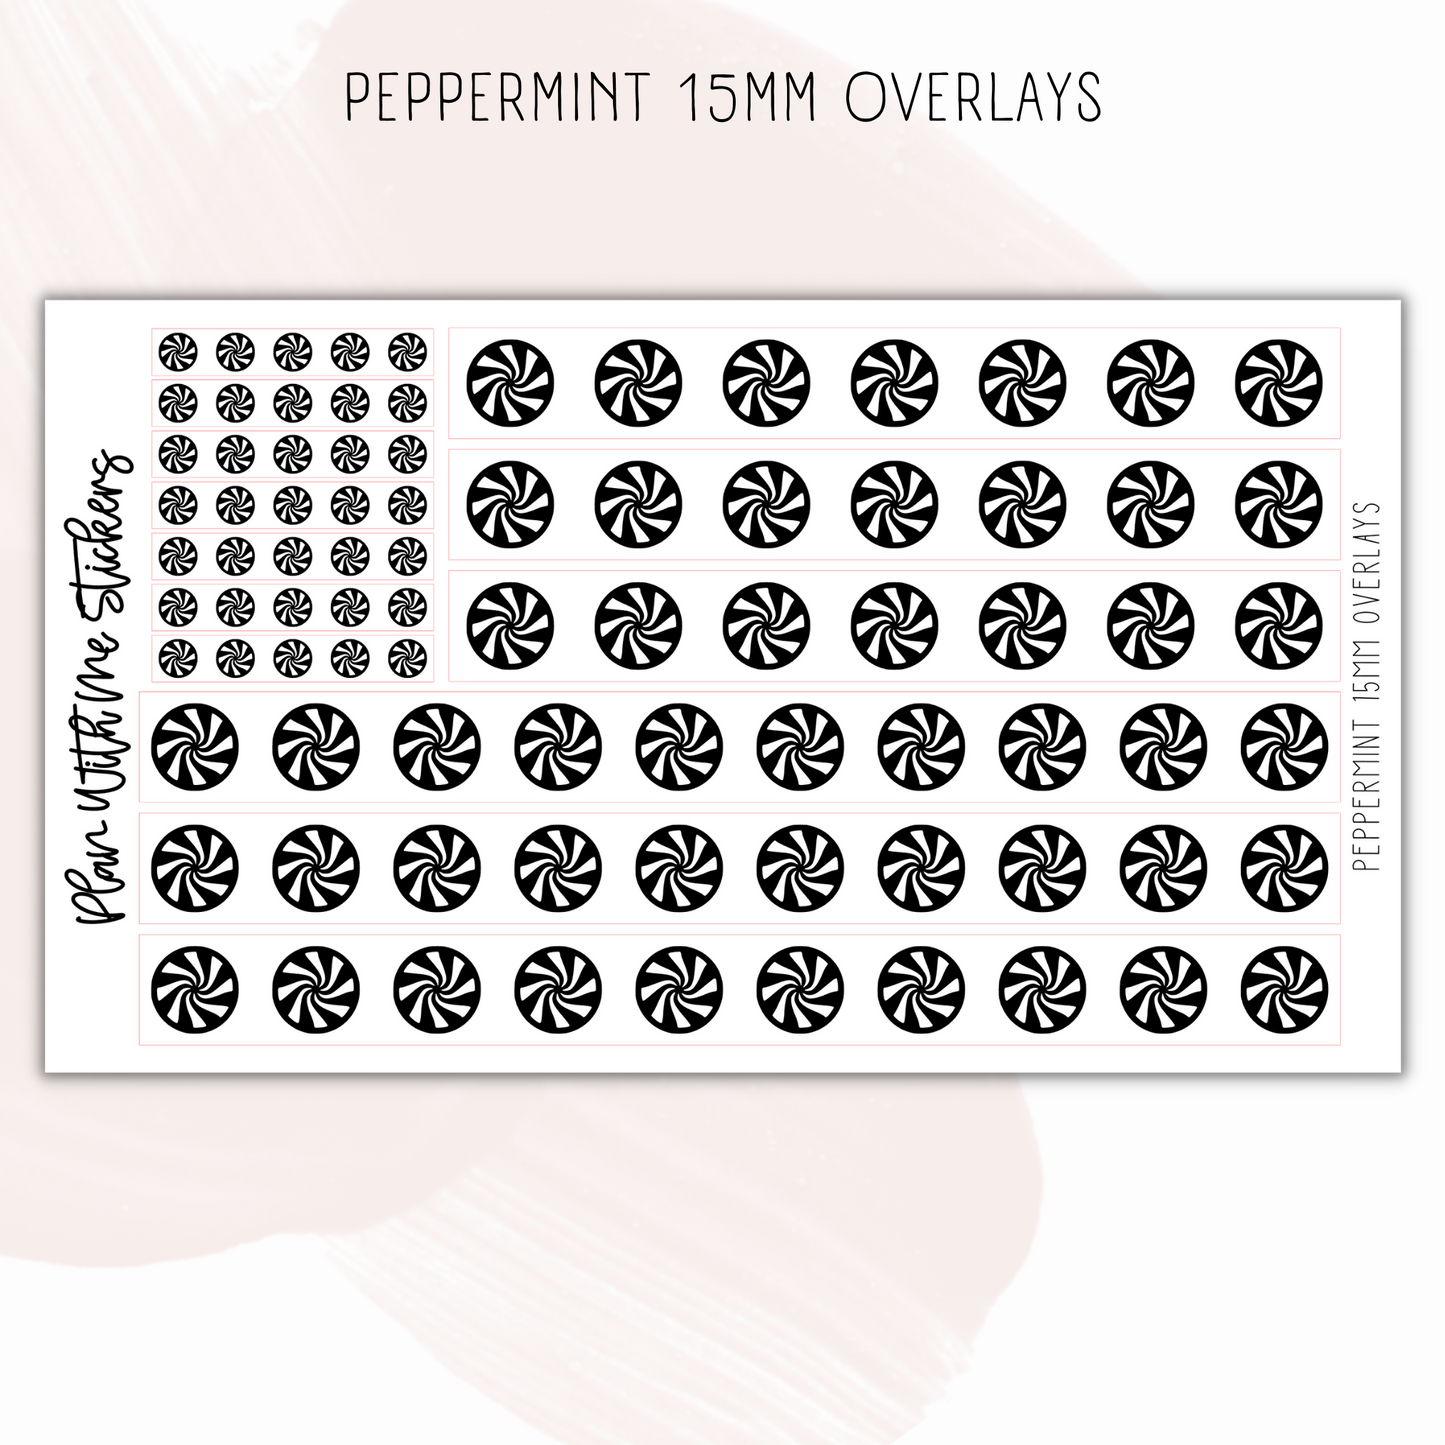 Peppermint 15mm Overlays